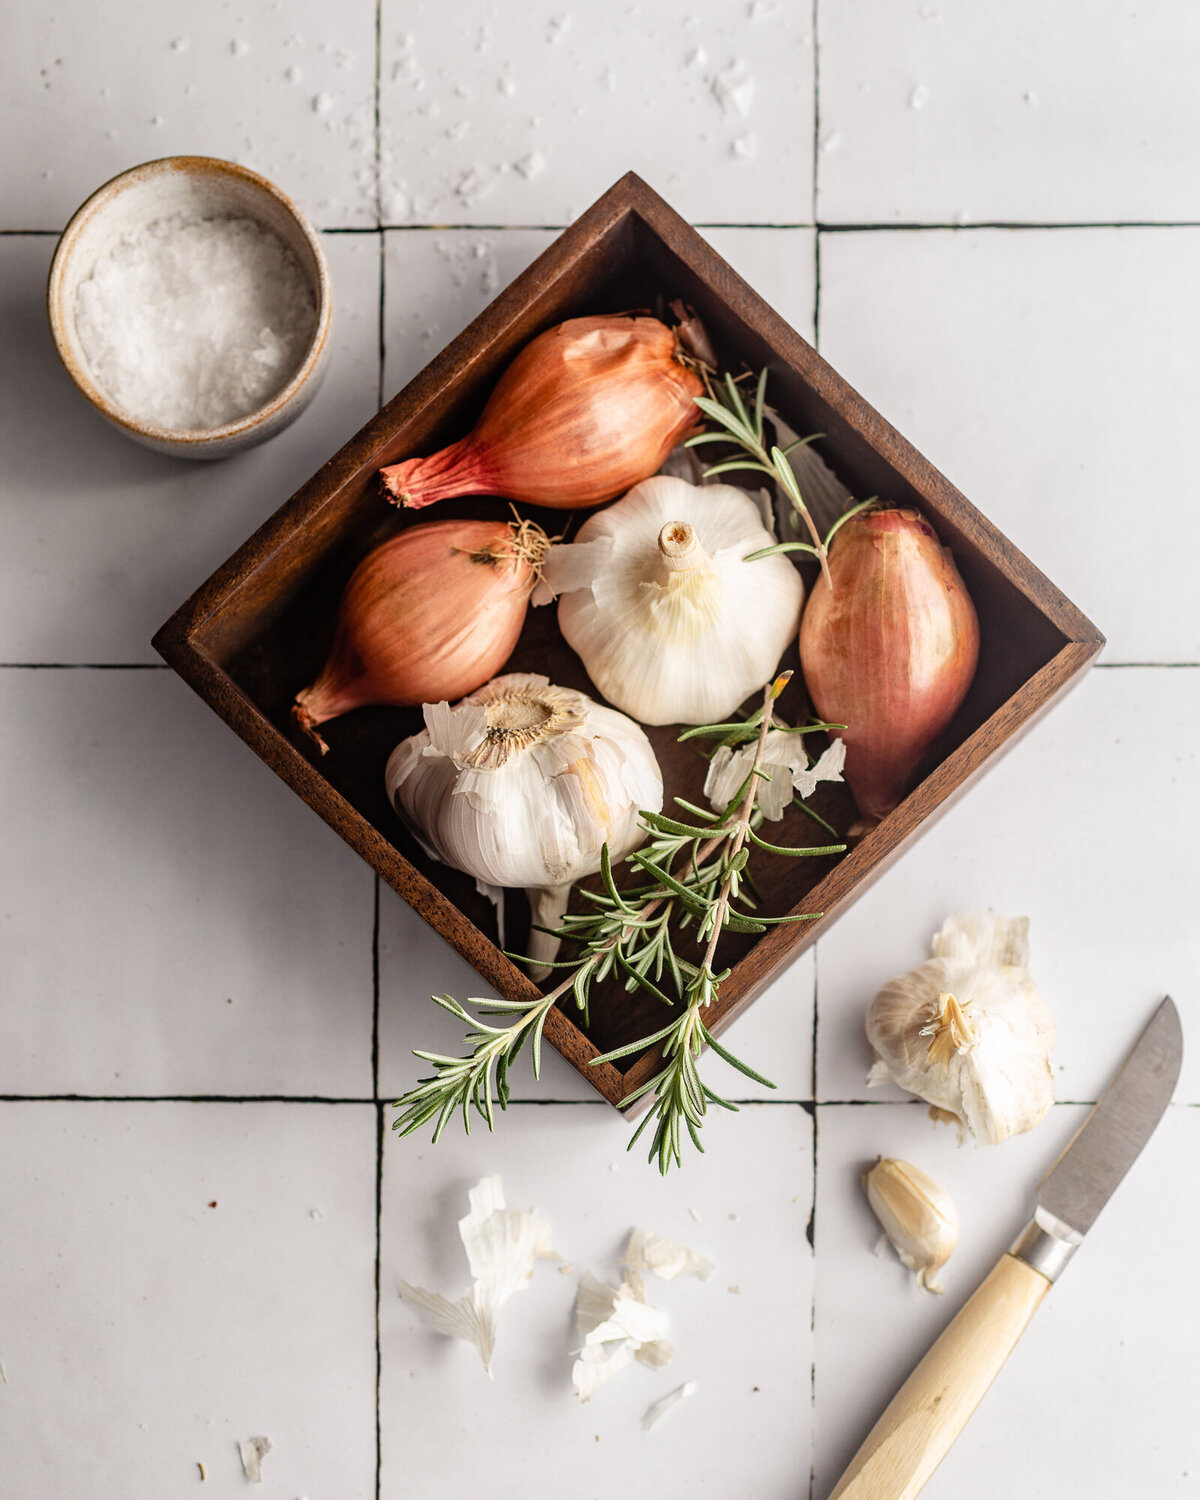 Garlic and Shallots - Food Photography - Frenchly Photography-2-2